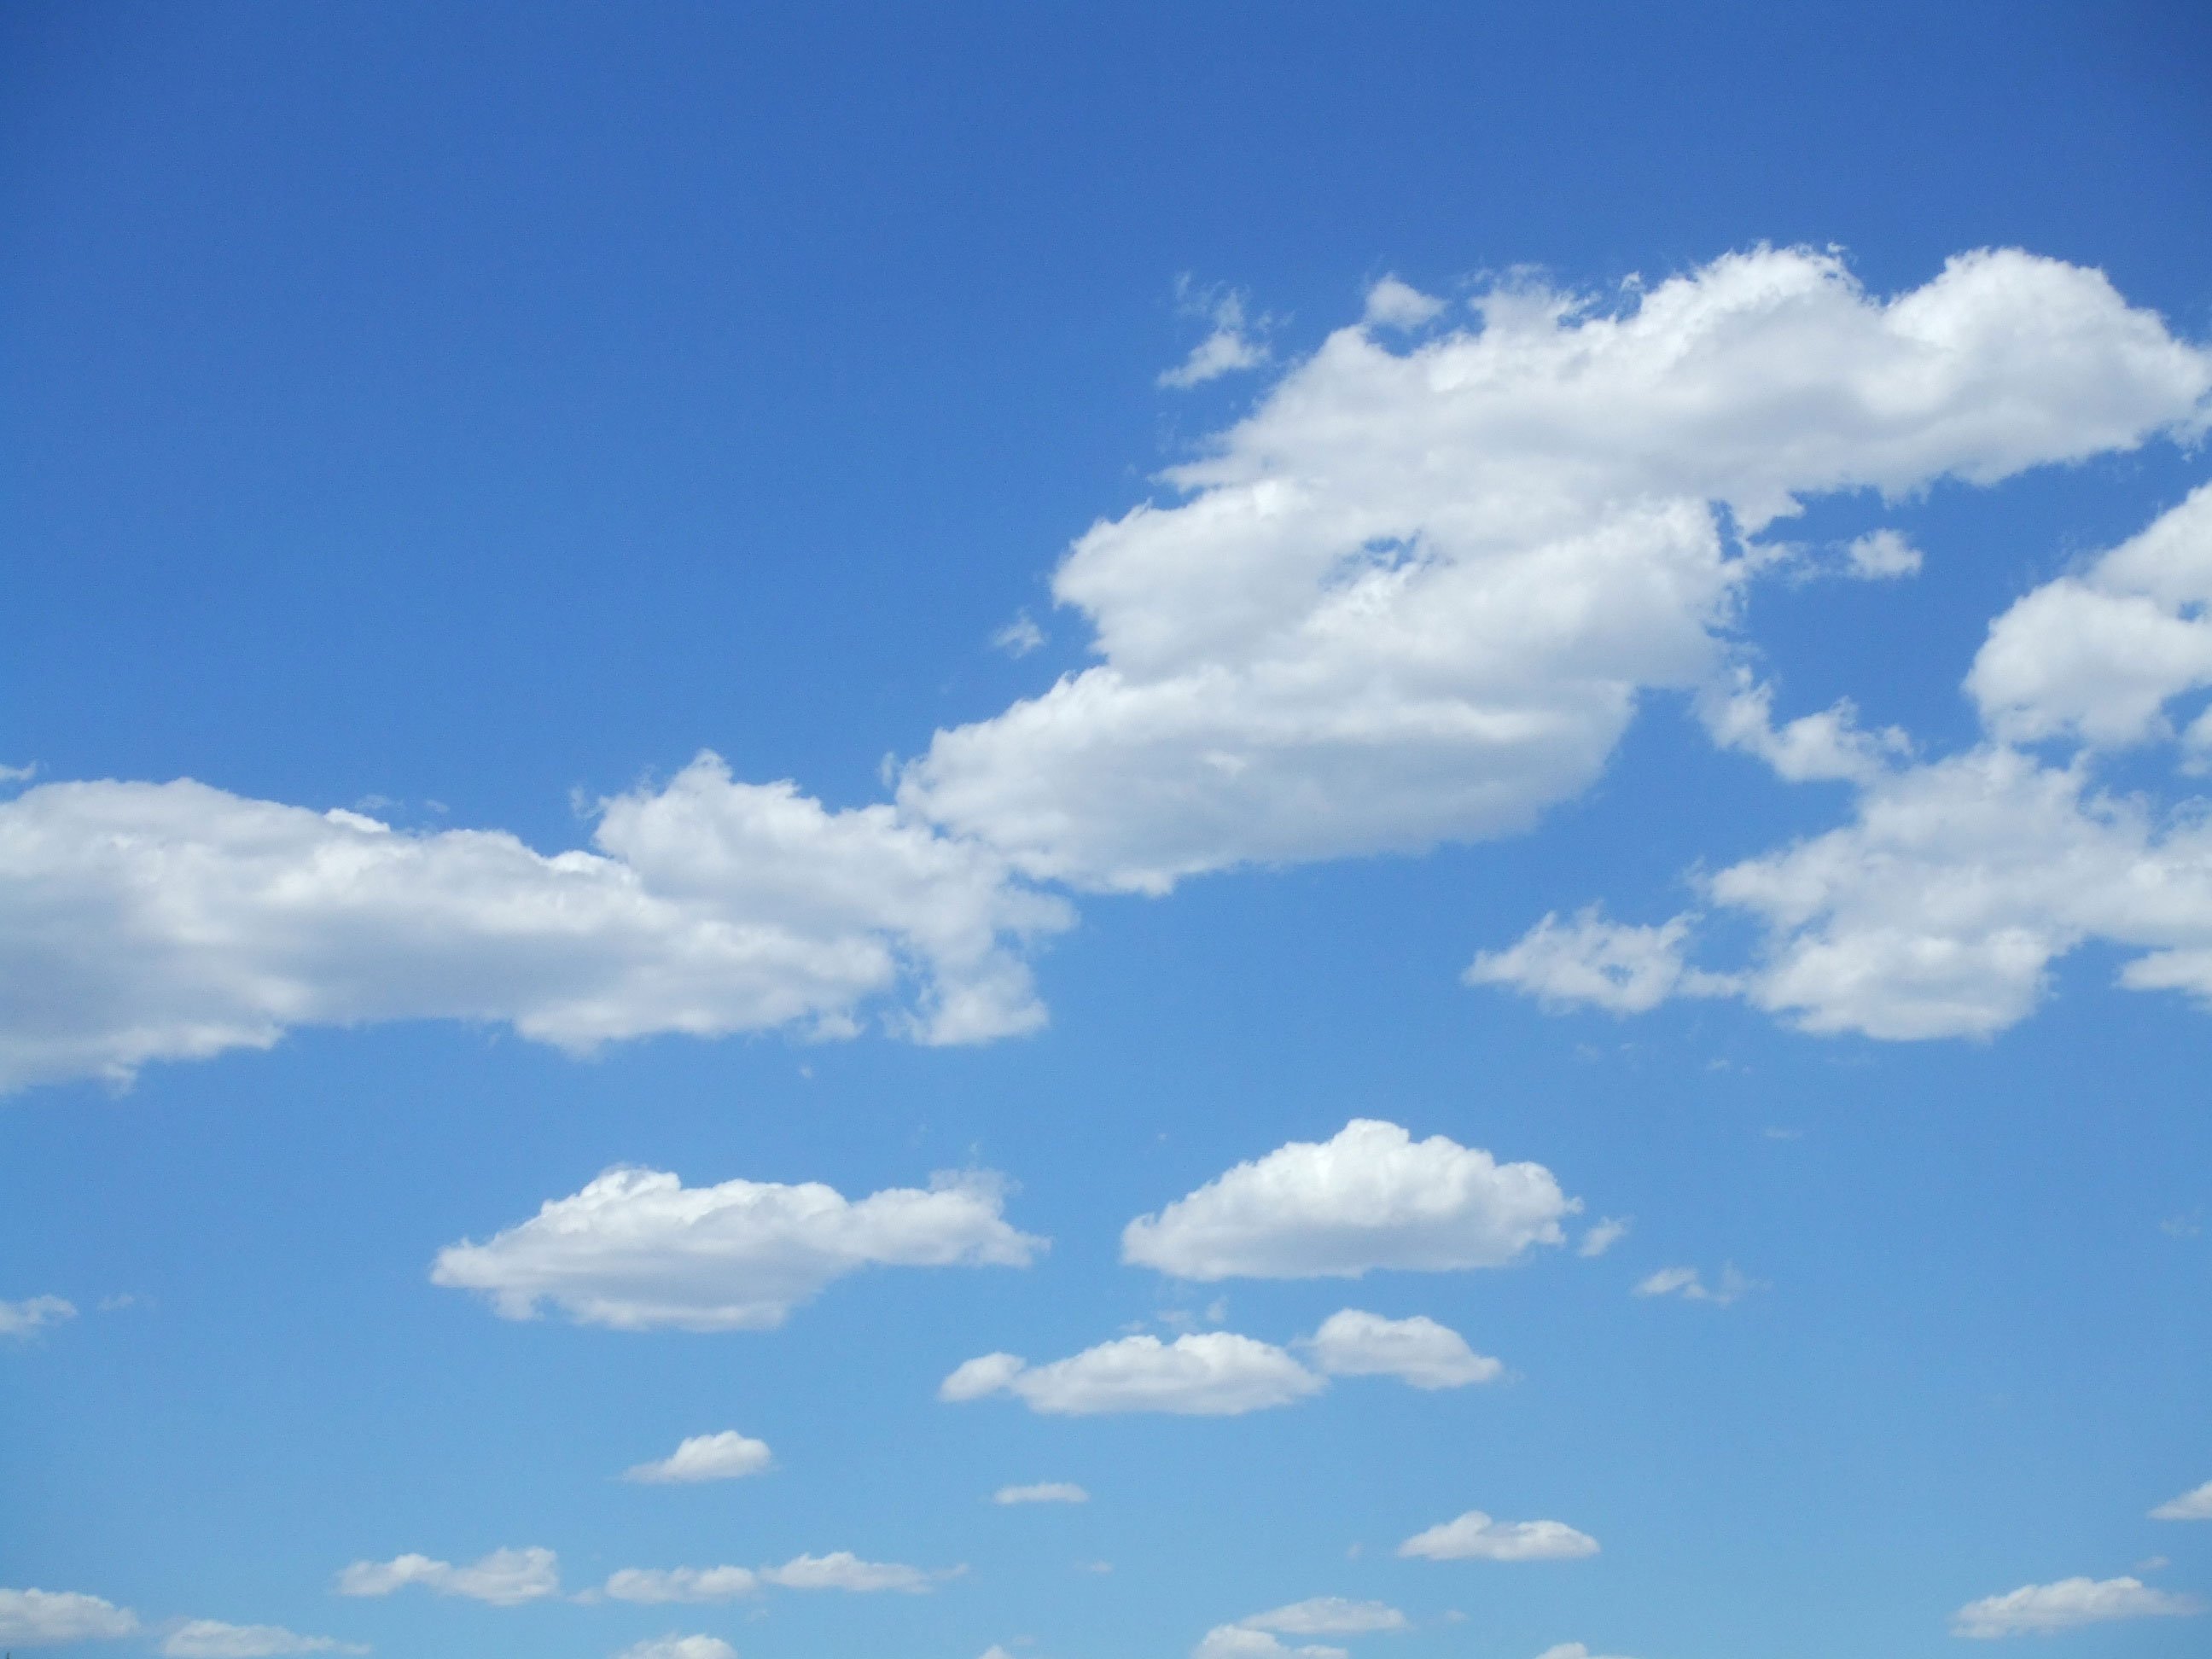  sky cloud texture sky texture photo download background clouds